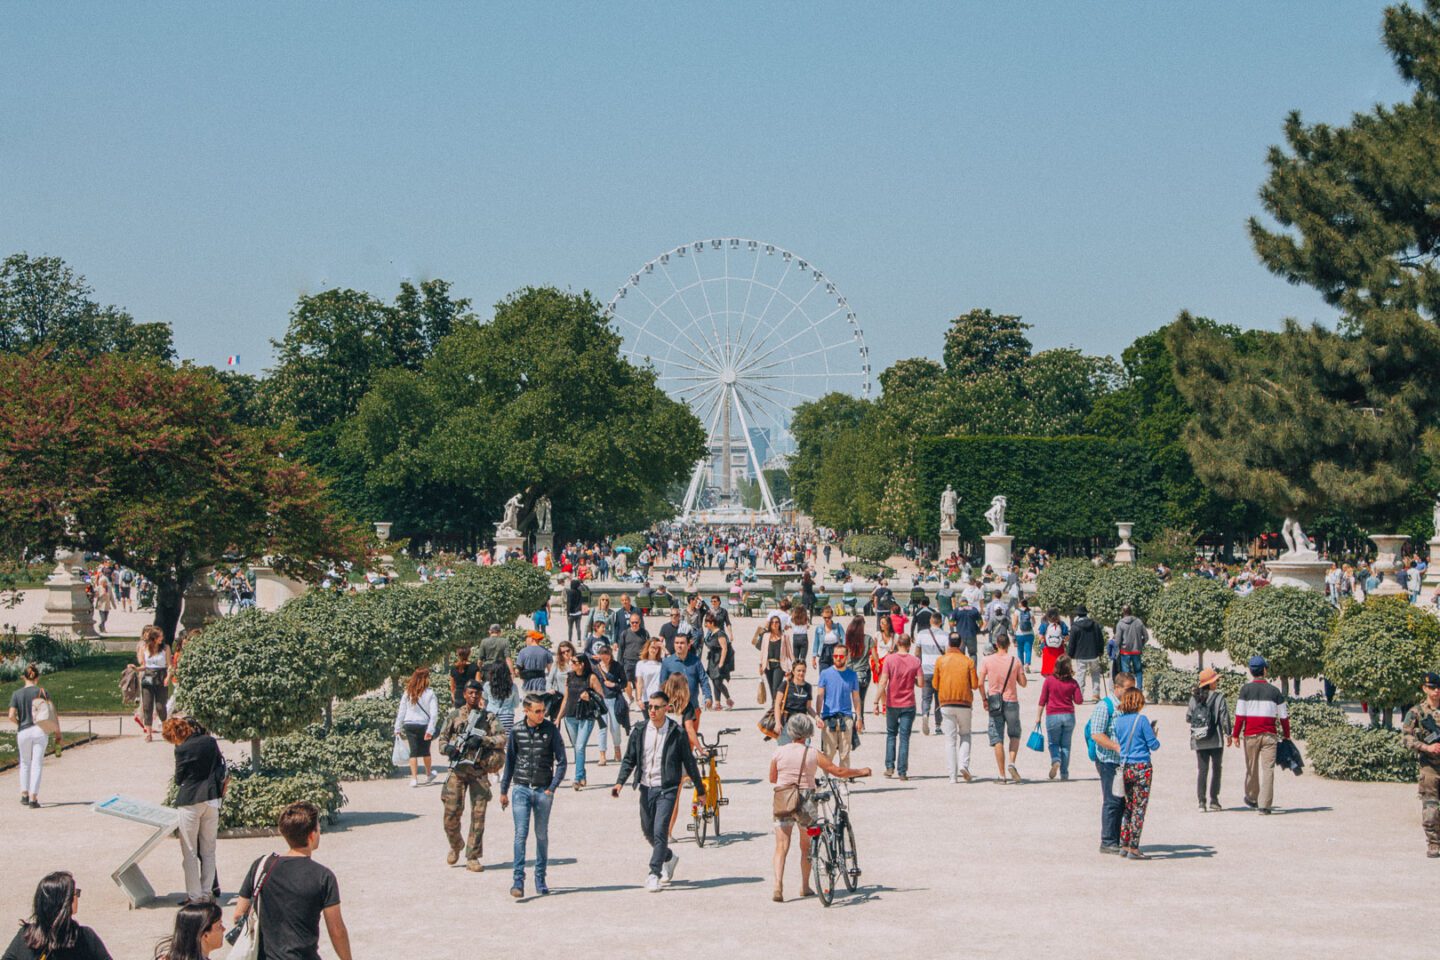 Tourists walk through central Paris, France in the spring months with the ferris wheel in the distance